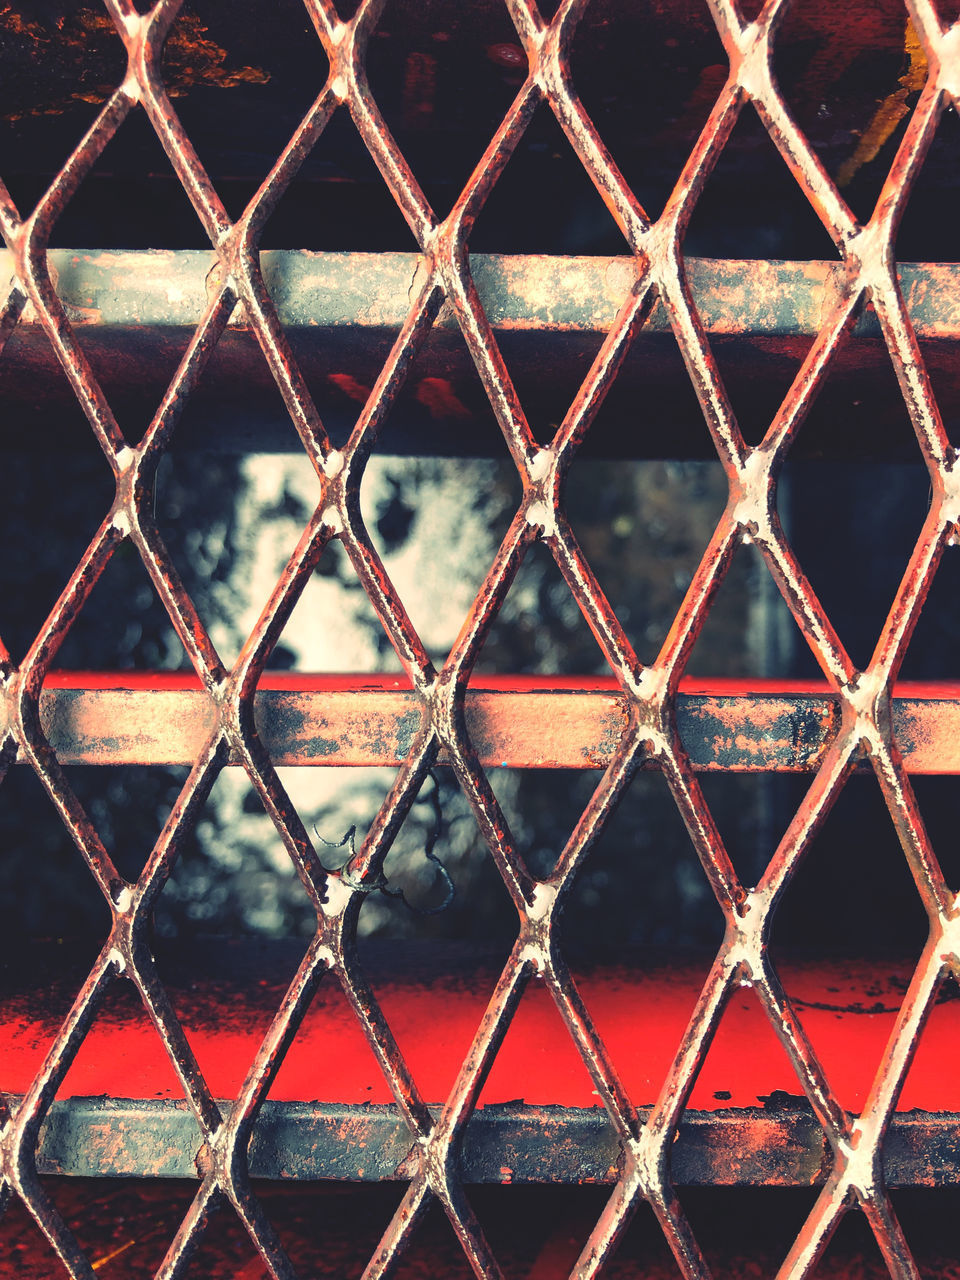 FULL FRAME SHOT OF CHAINLINK FENCE WITH METAL CHAIN